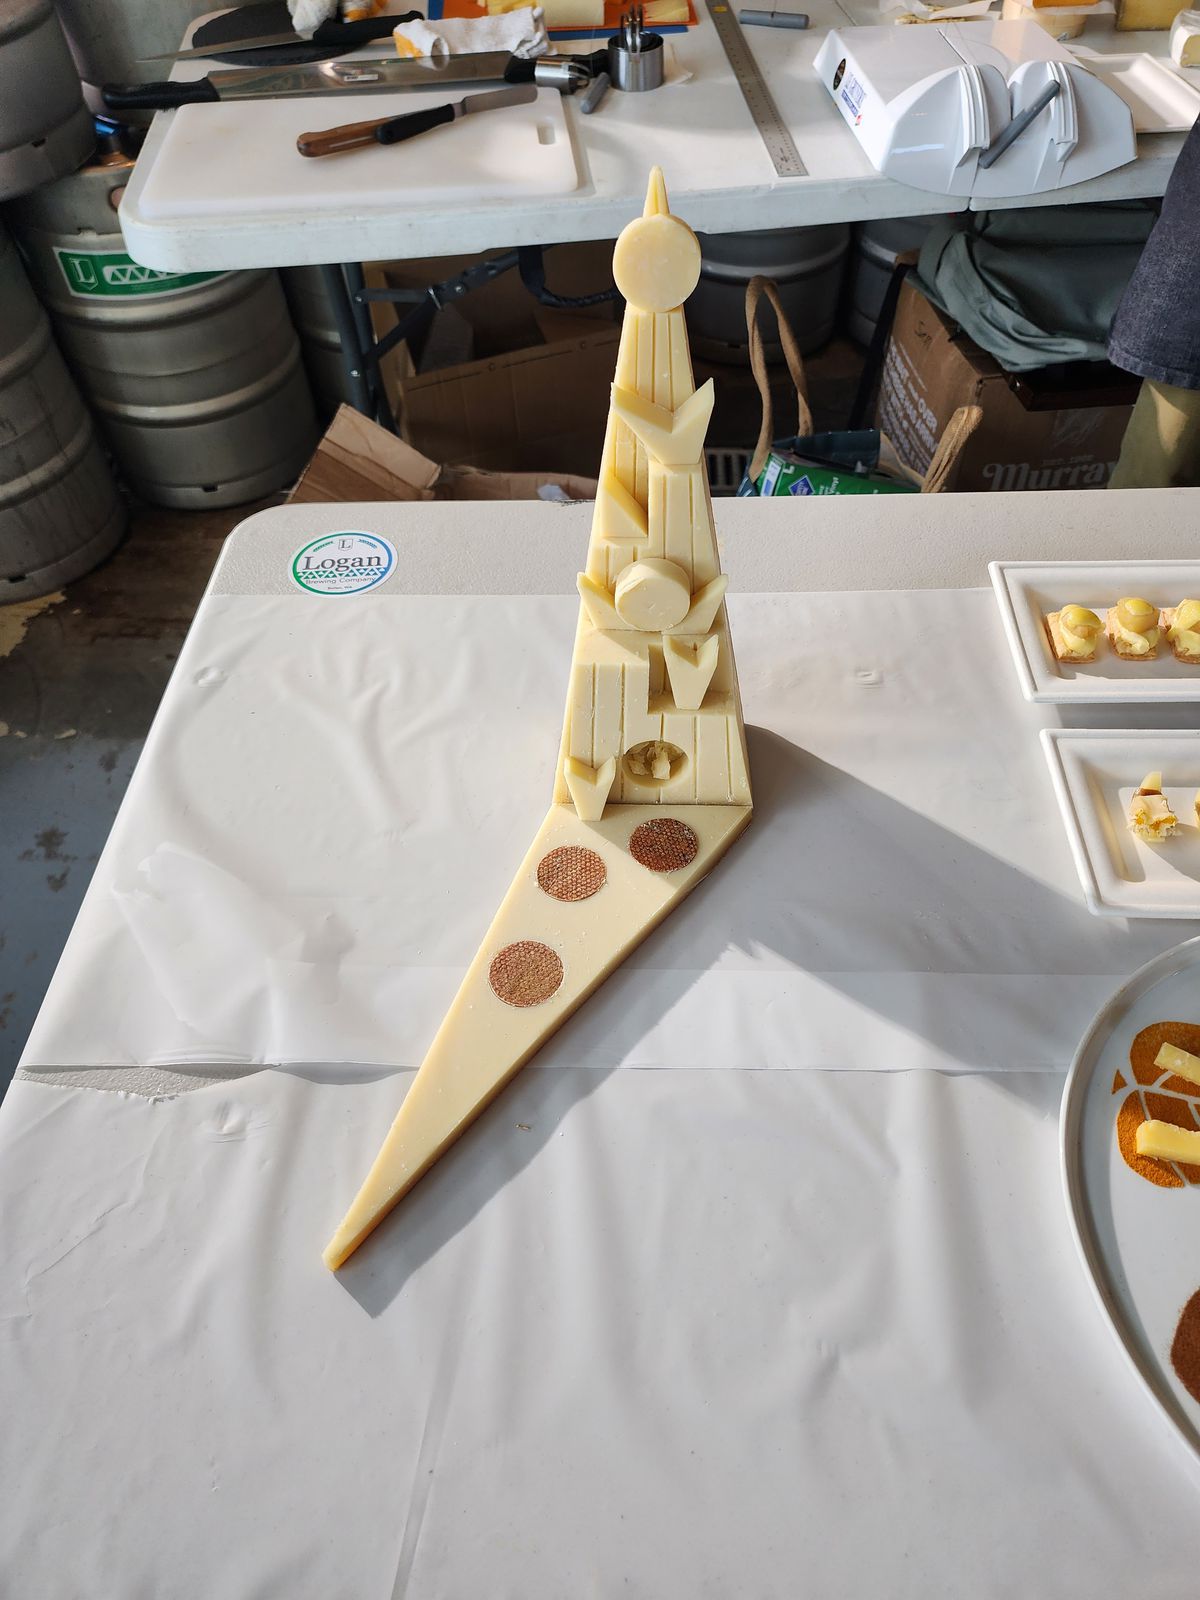 A small cheese sculpture sits on a white table.